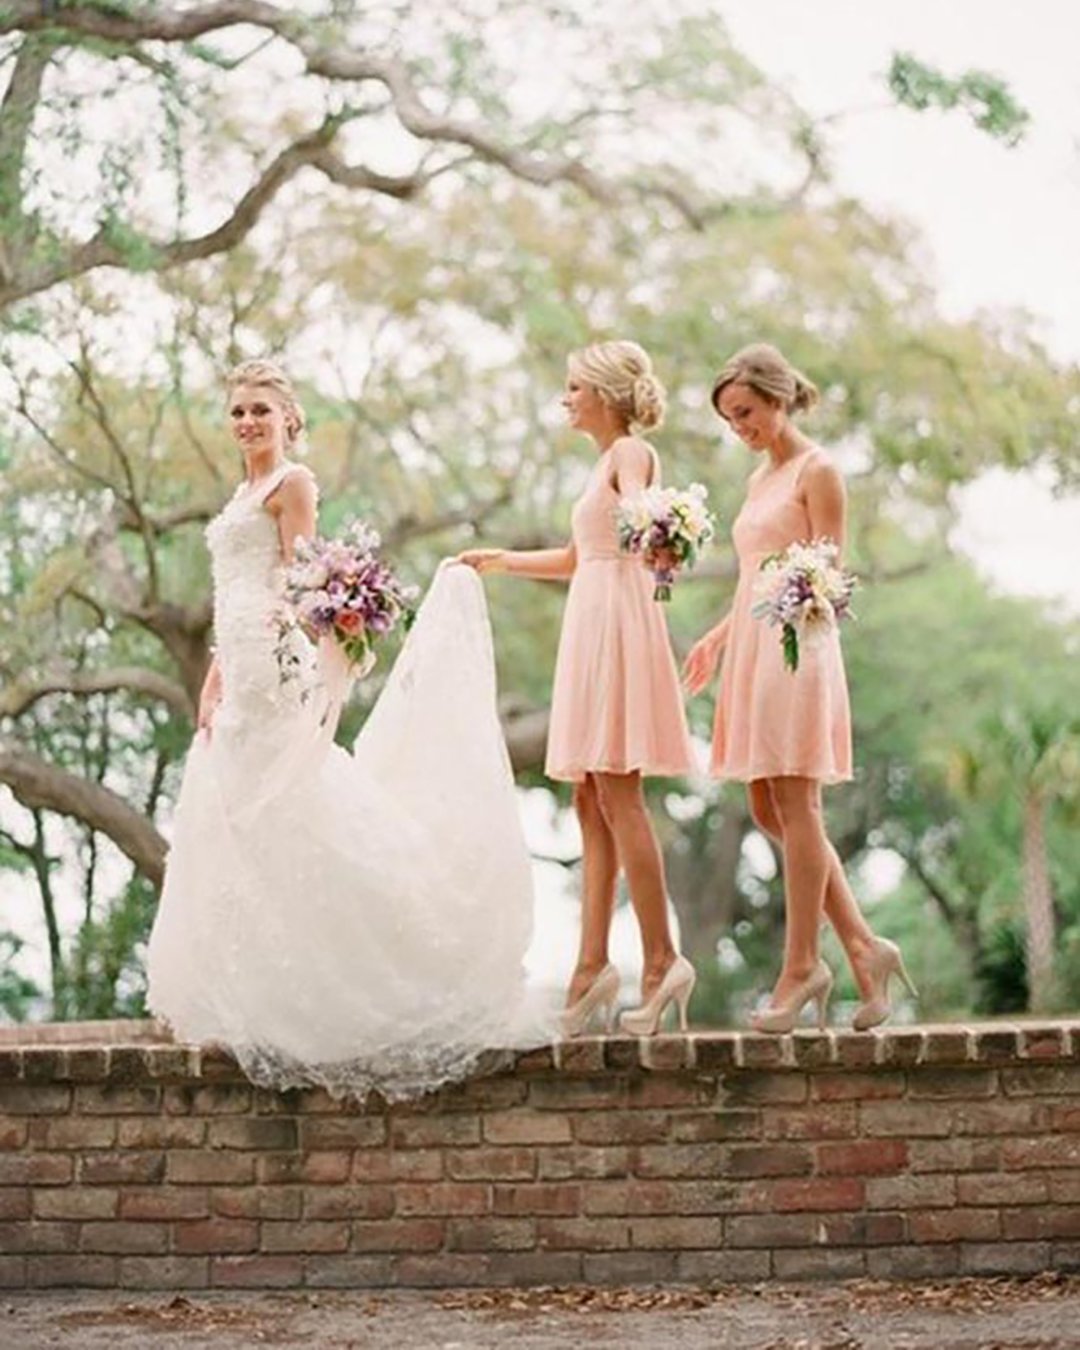 wedding photos with your bridesmaids girl near tree emily heizer photography